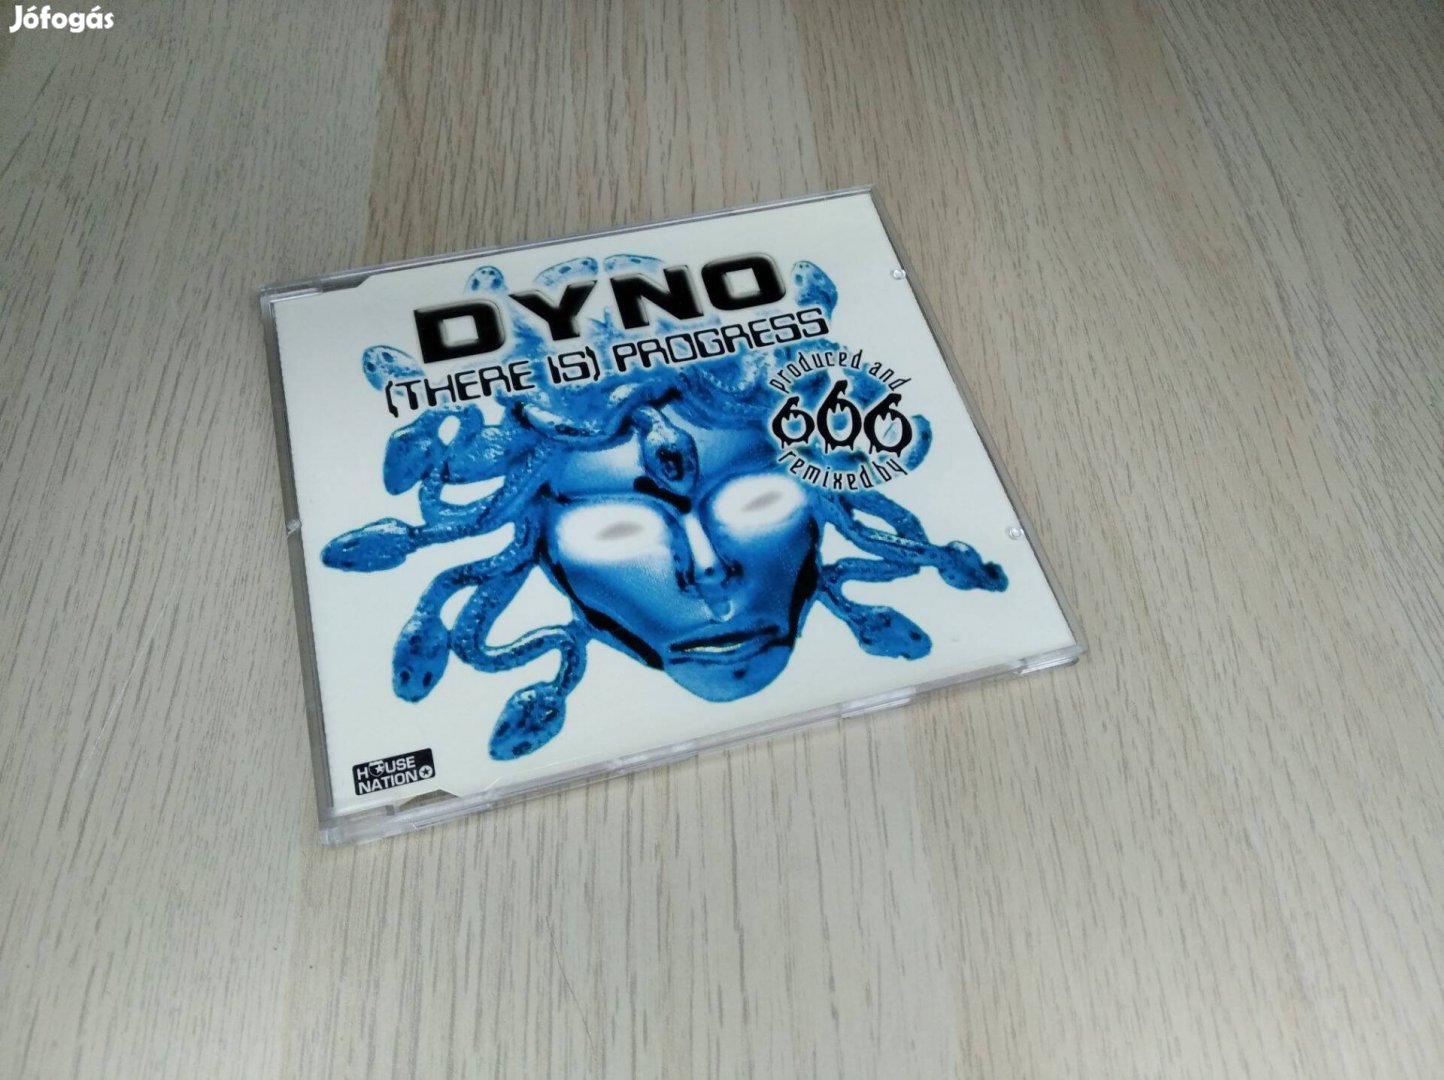 Dyno - (There Is) Progress / Maxi CD 1997